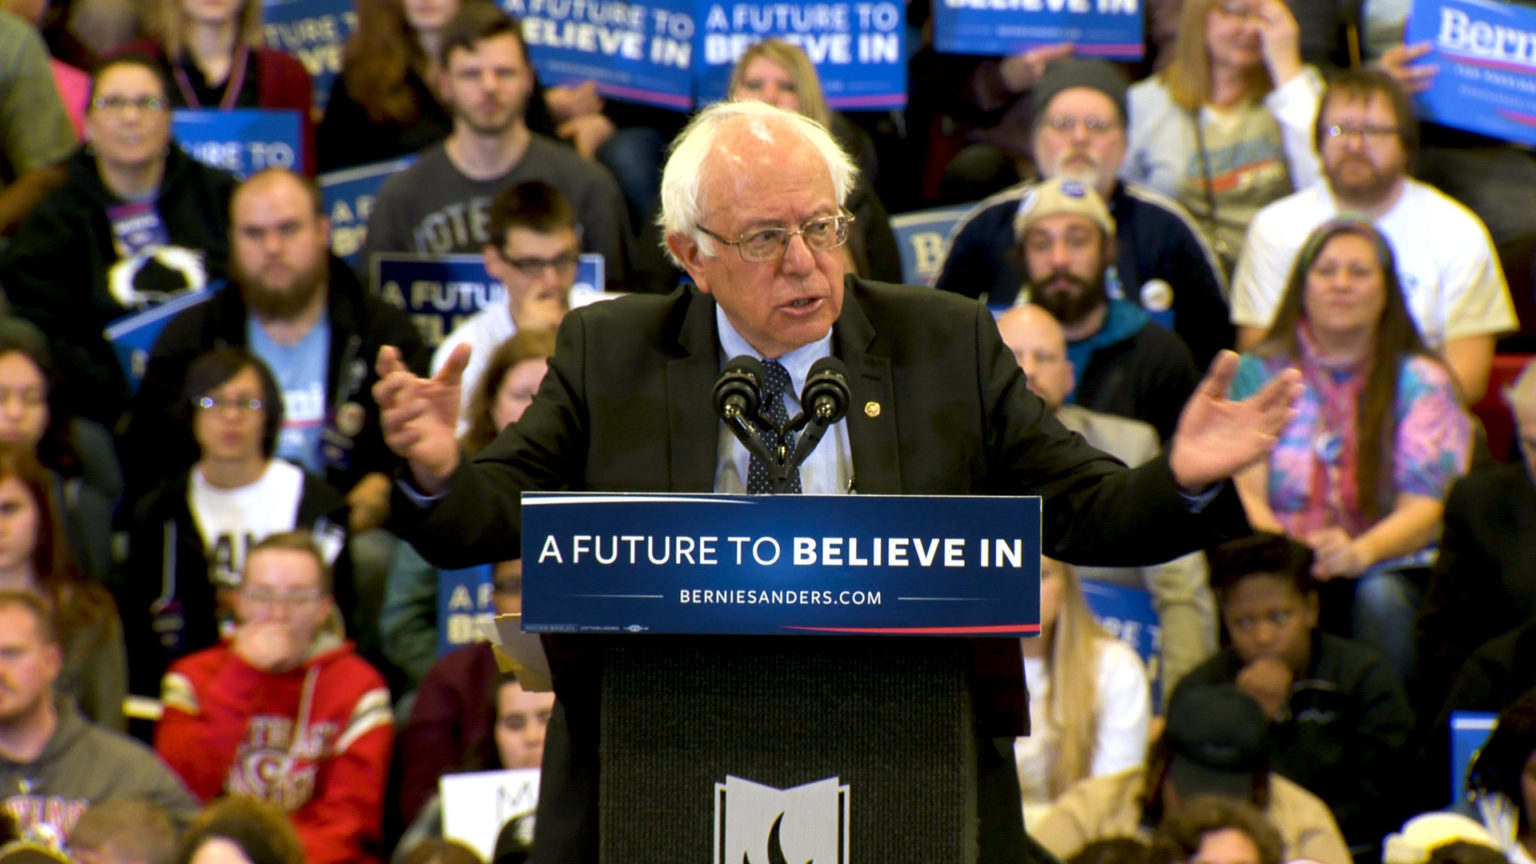 Bernie Sanders speaks at a 2016 campaign rally at Carthage College in Wisconsin.